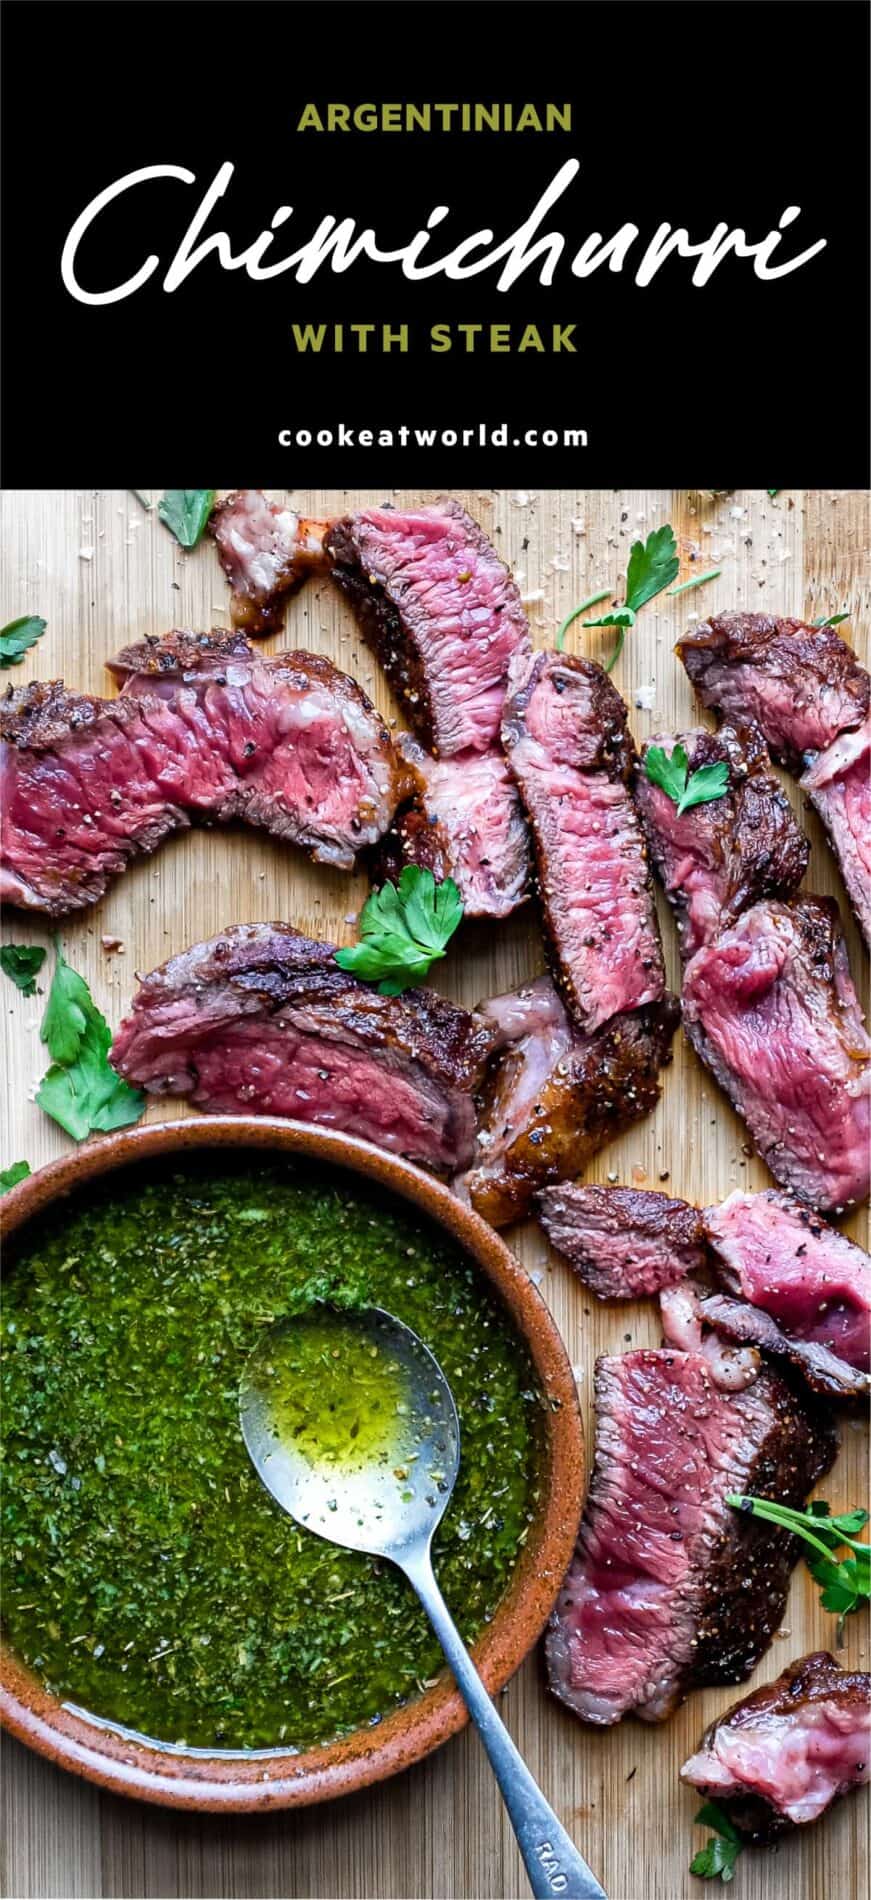 A small bowl of chimichurri sauce with a spoon sits alongside slices of rare cooked ribeye steak